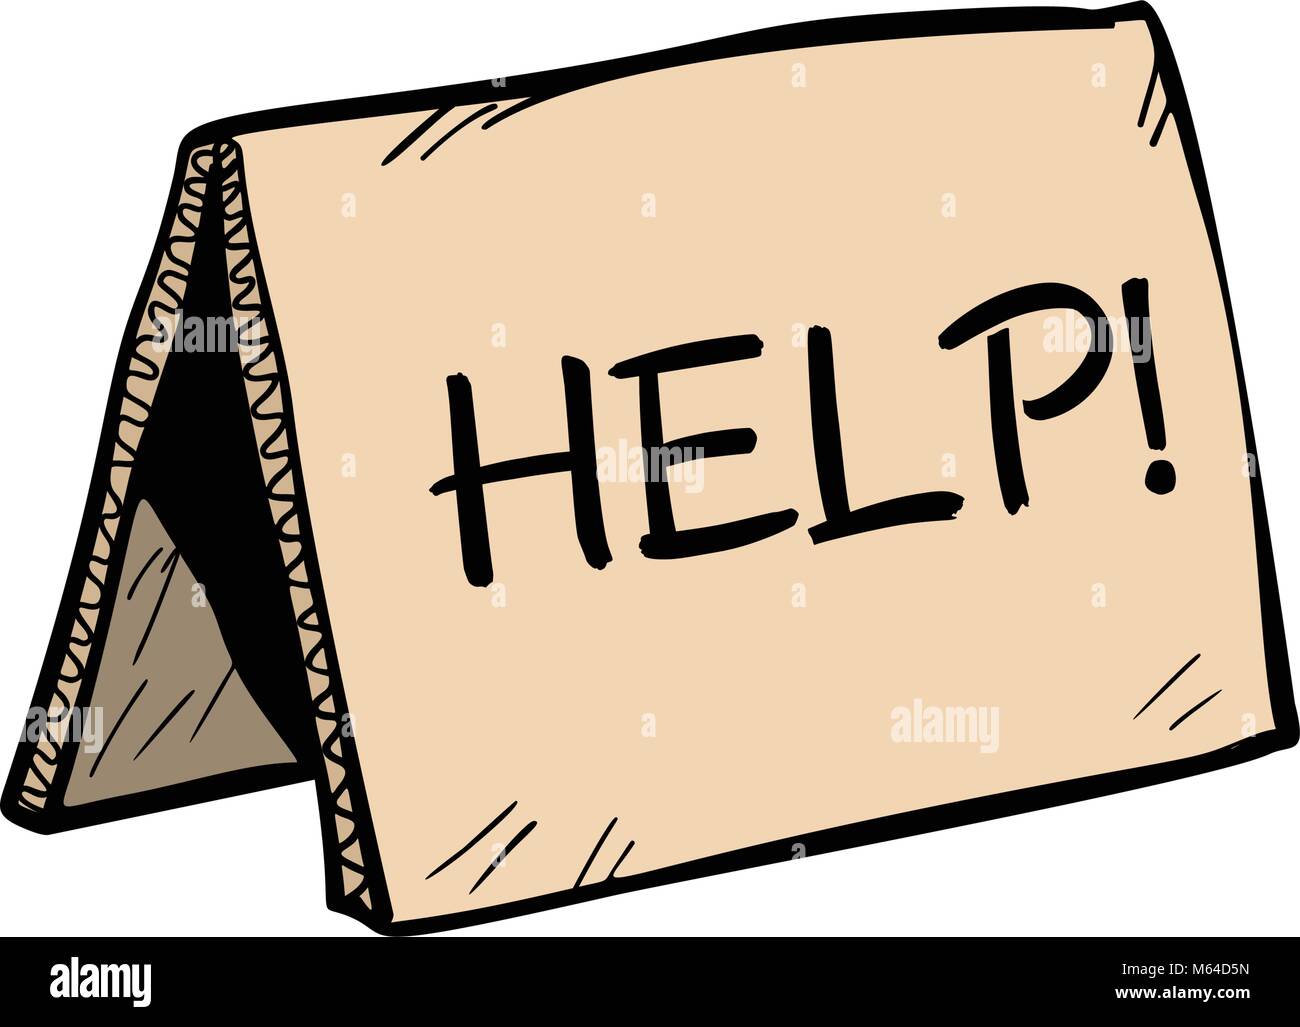 Help lettering sign for donations Stock Vector